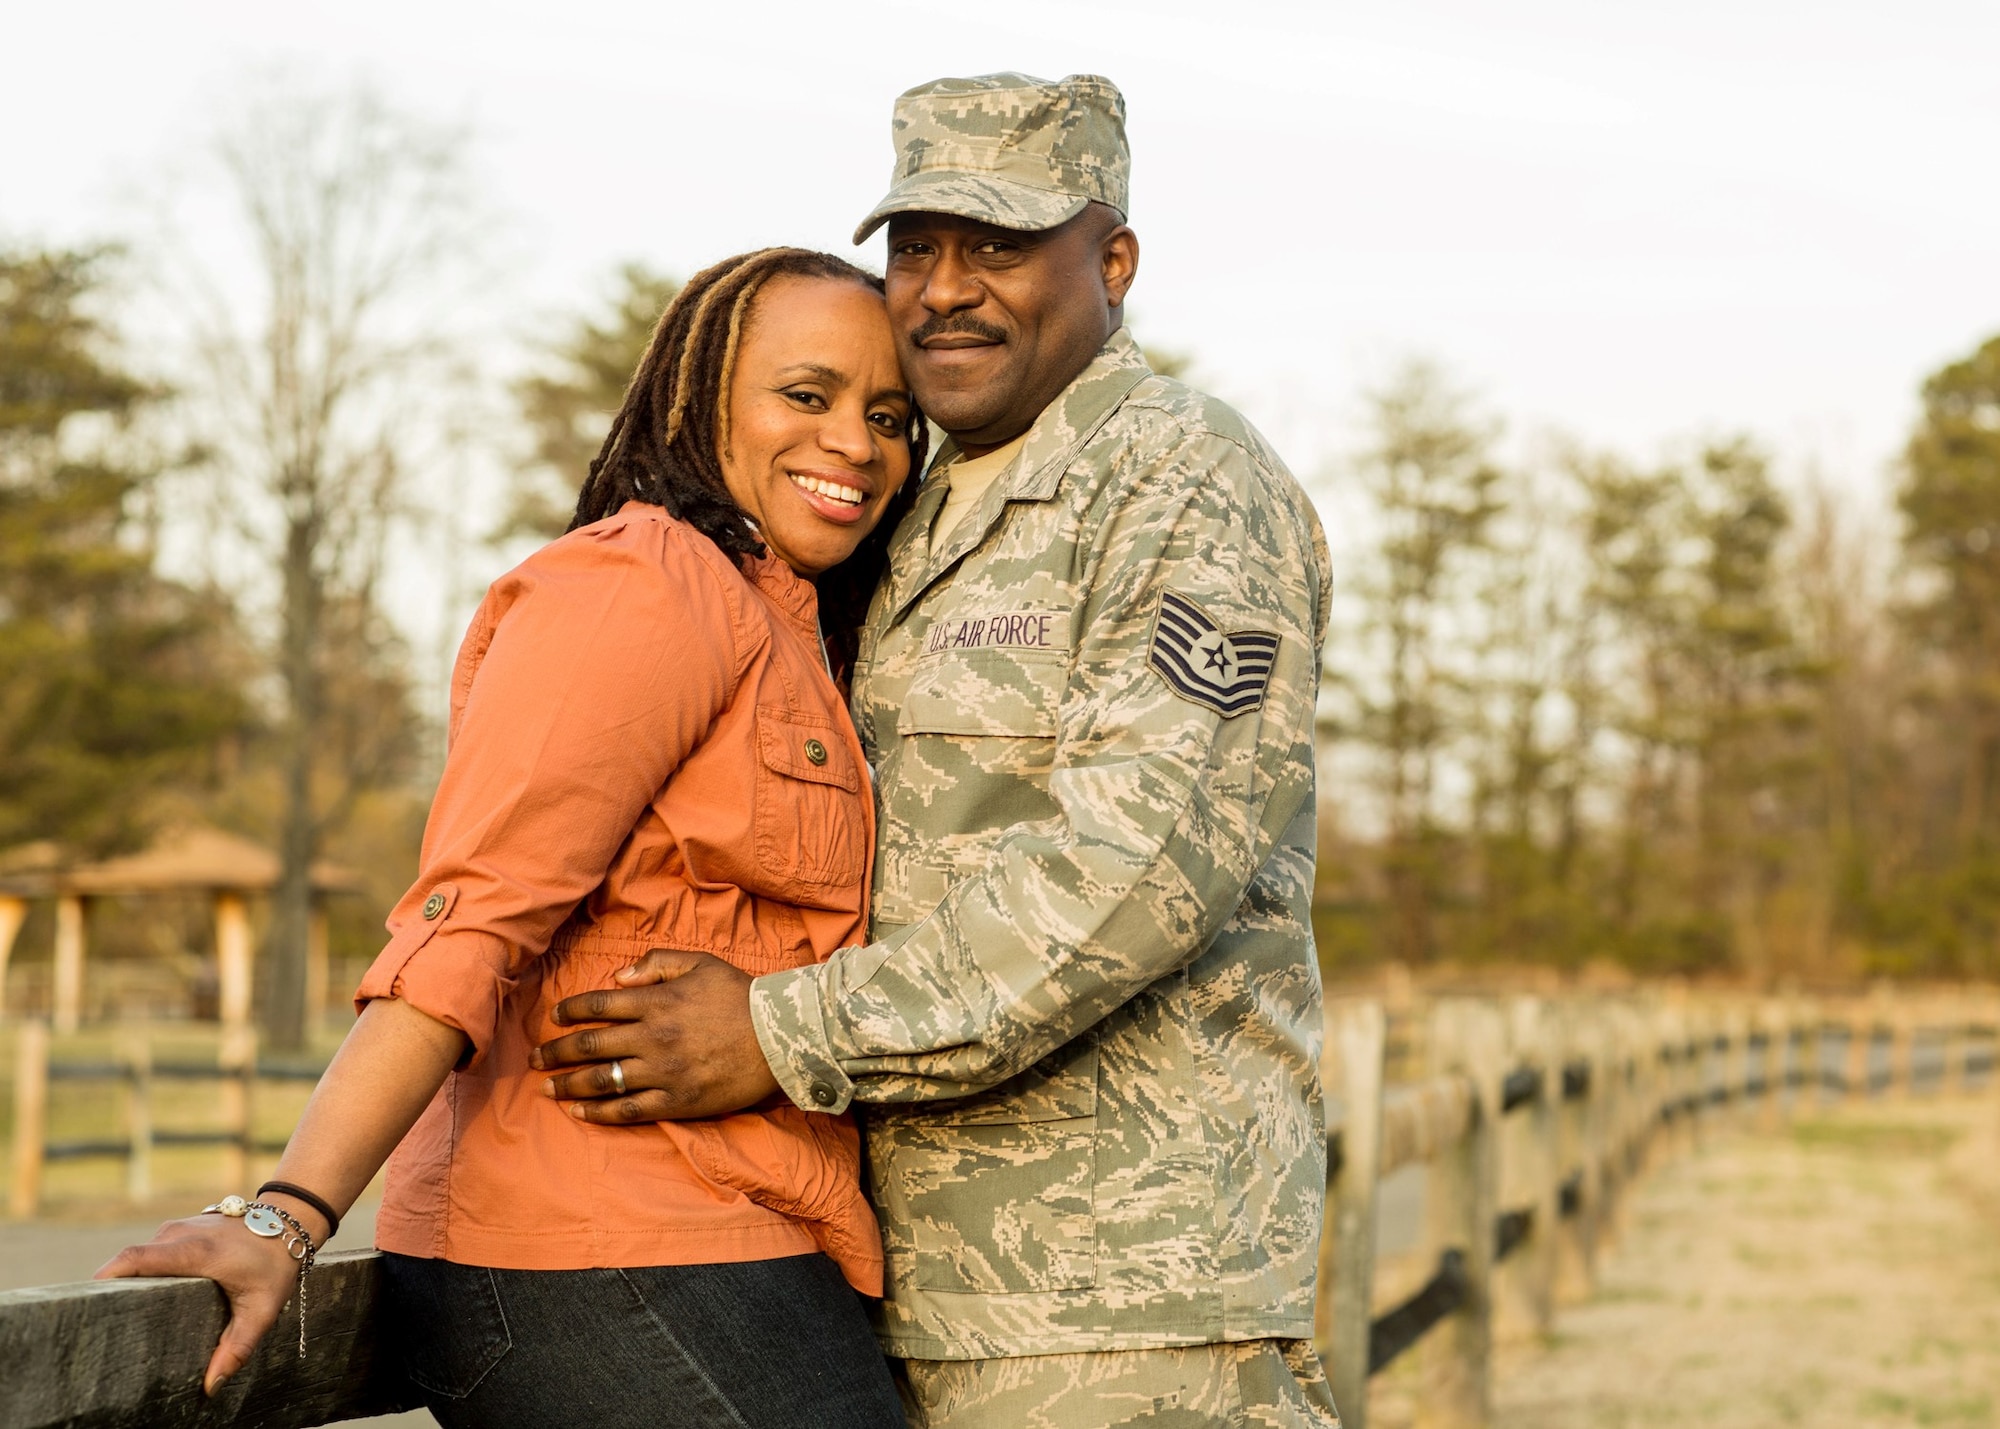 2013 Armed Forces Insurance Military Spouse of the Year, Alicia Hinds Ward poses with her husband, Tech. Sgt. Edwinston Ward of the 113th Logistics Readiness Squadron, Washington D.C. Air National Guard.